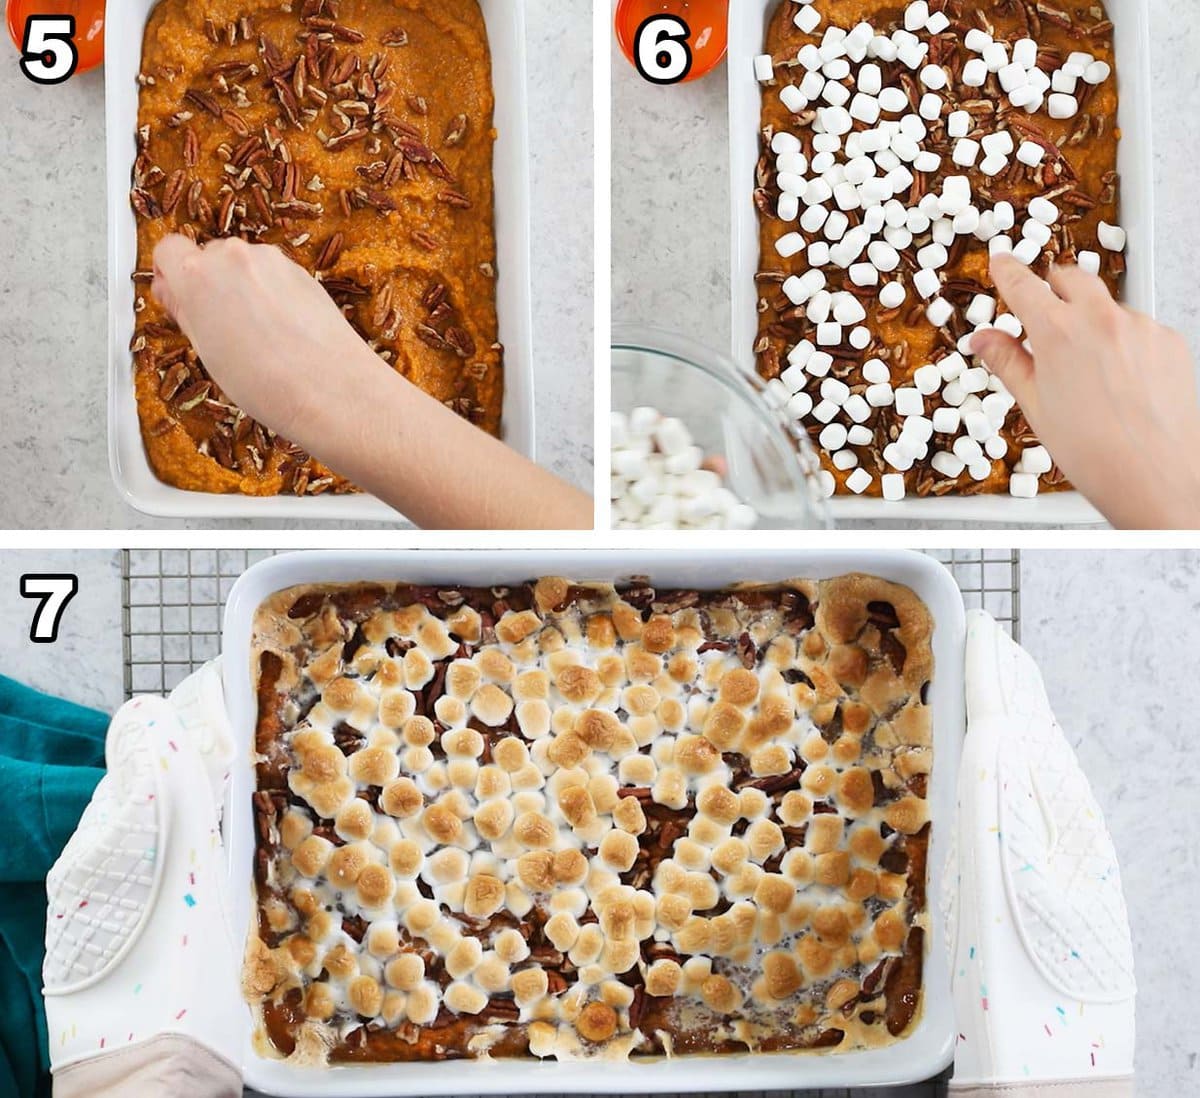 Three photos showing sweet potato casserole being topped with nuts and marshmallows.